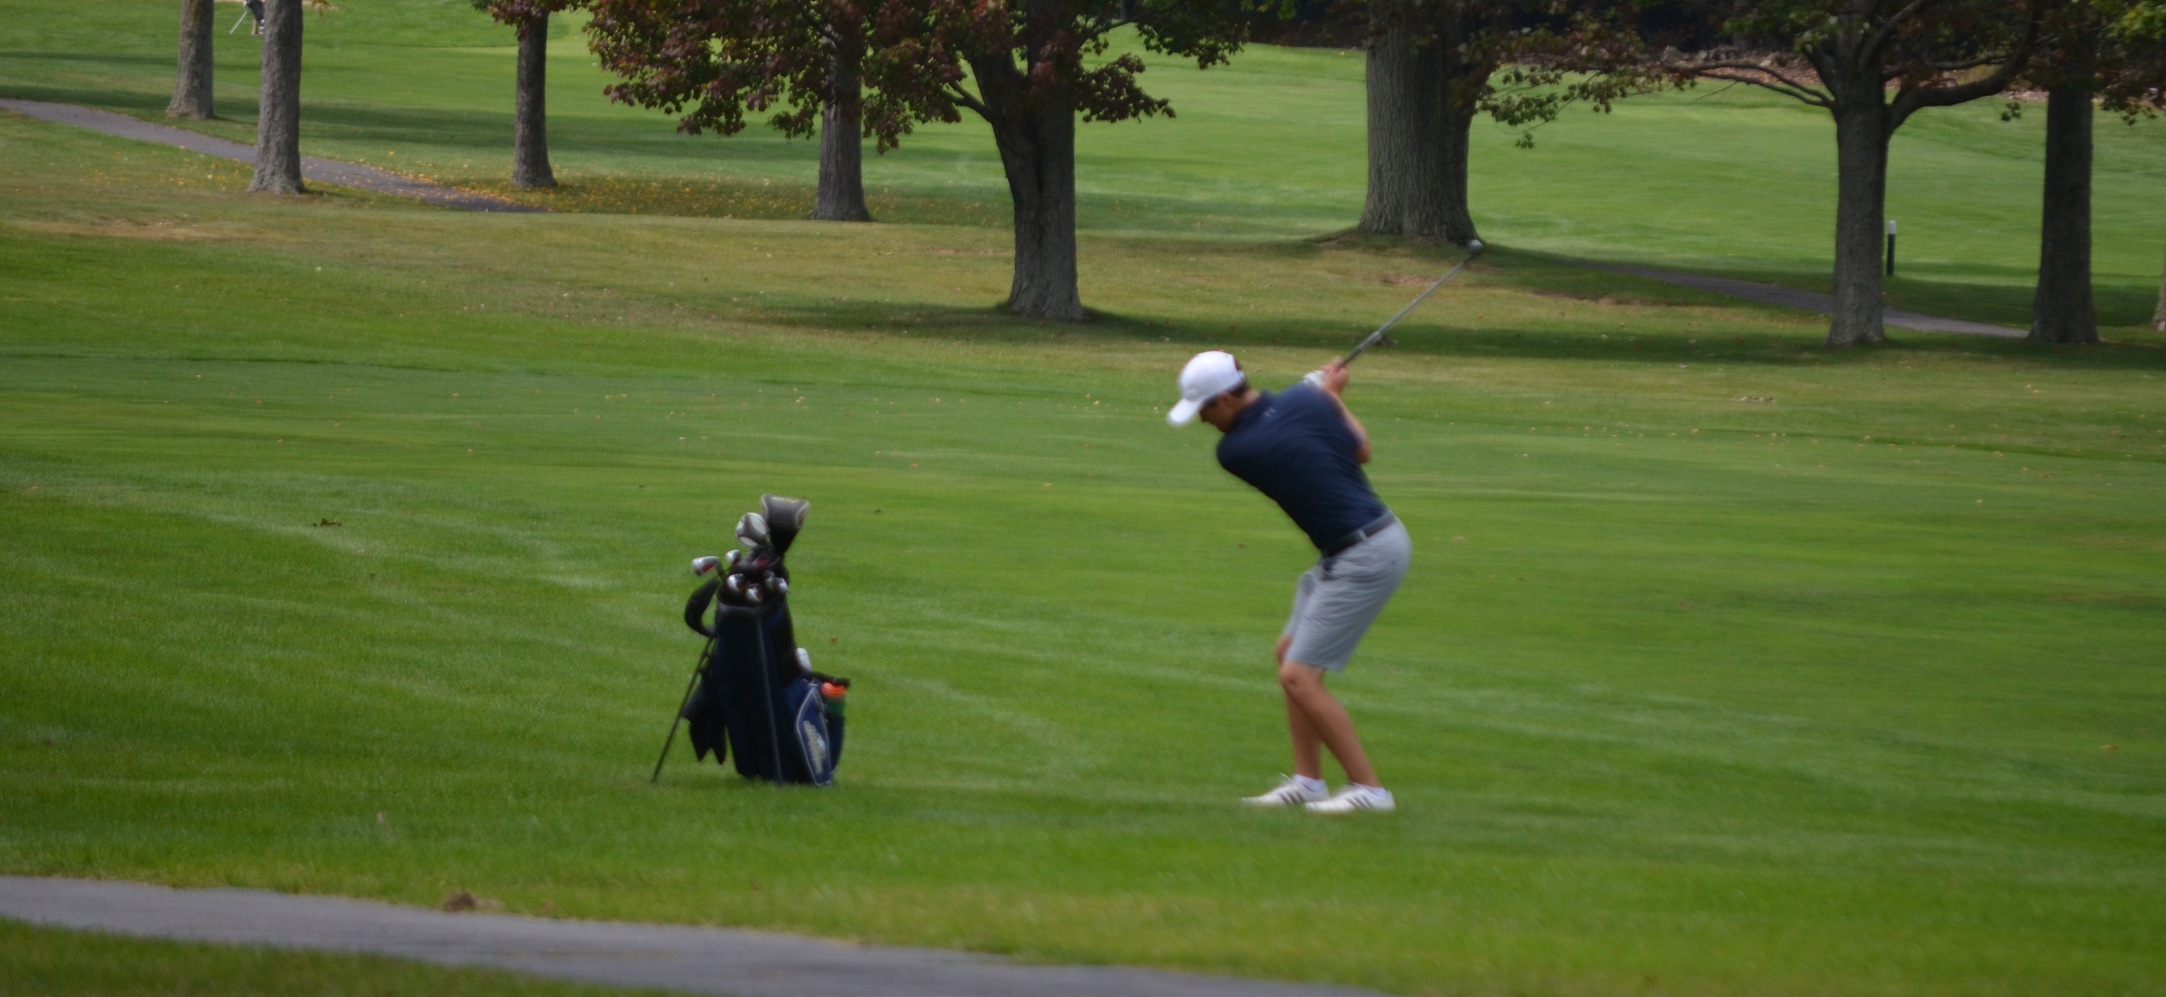 Men’s Golf Competes in Two Day Goucher Invitational